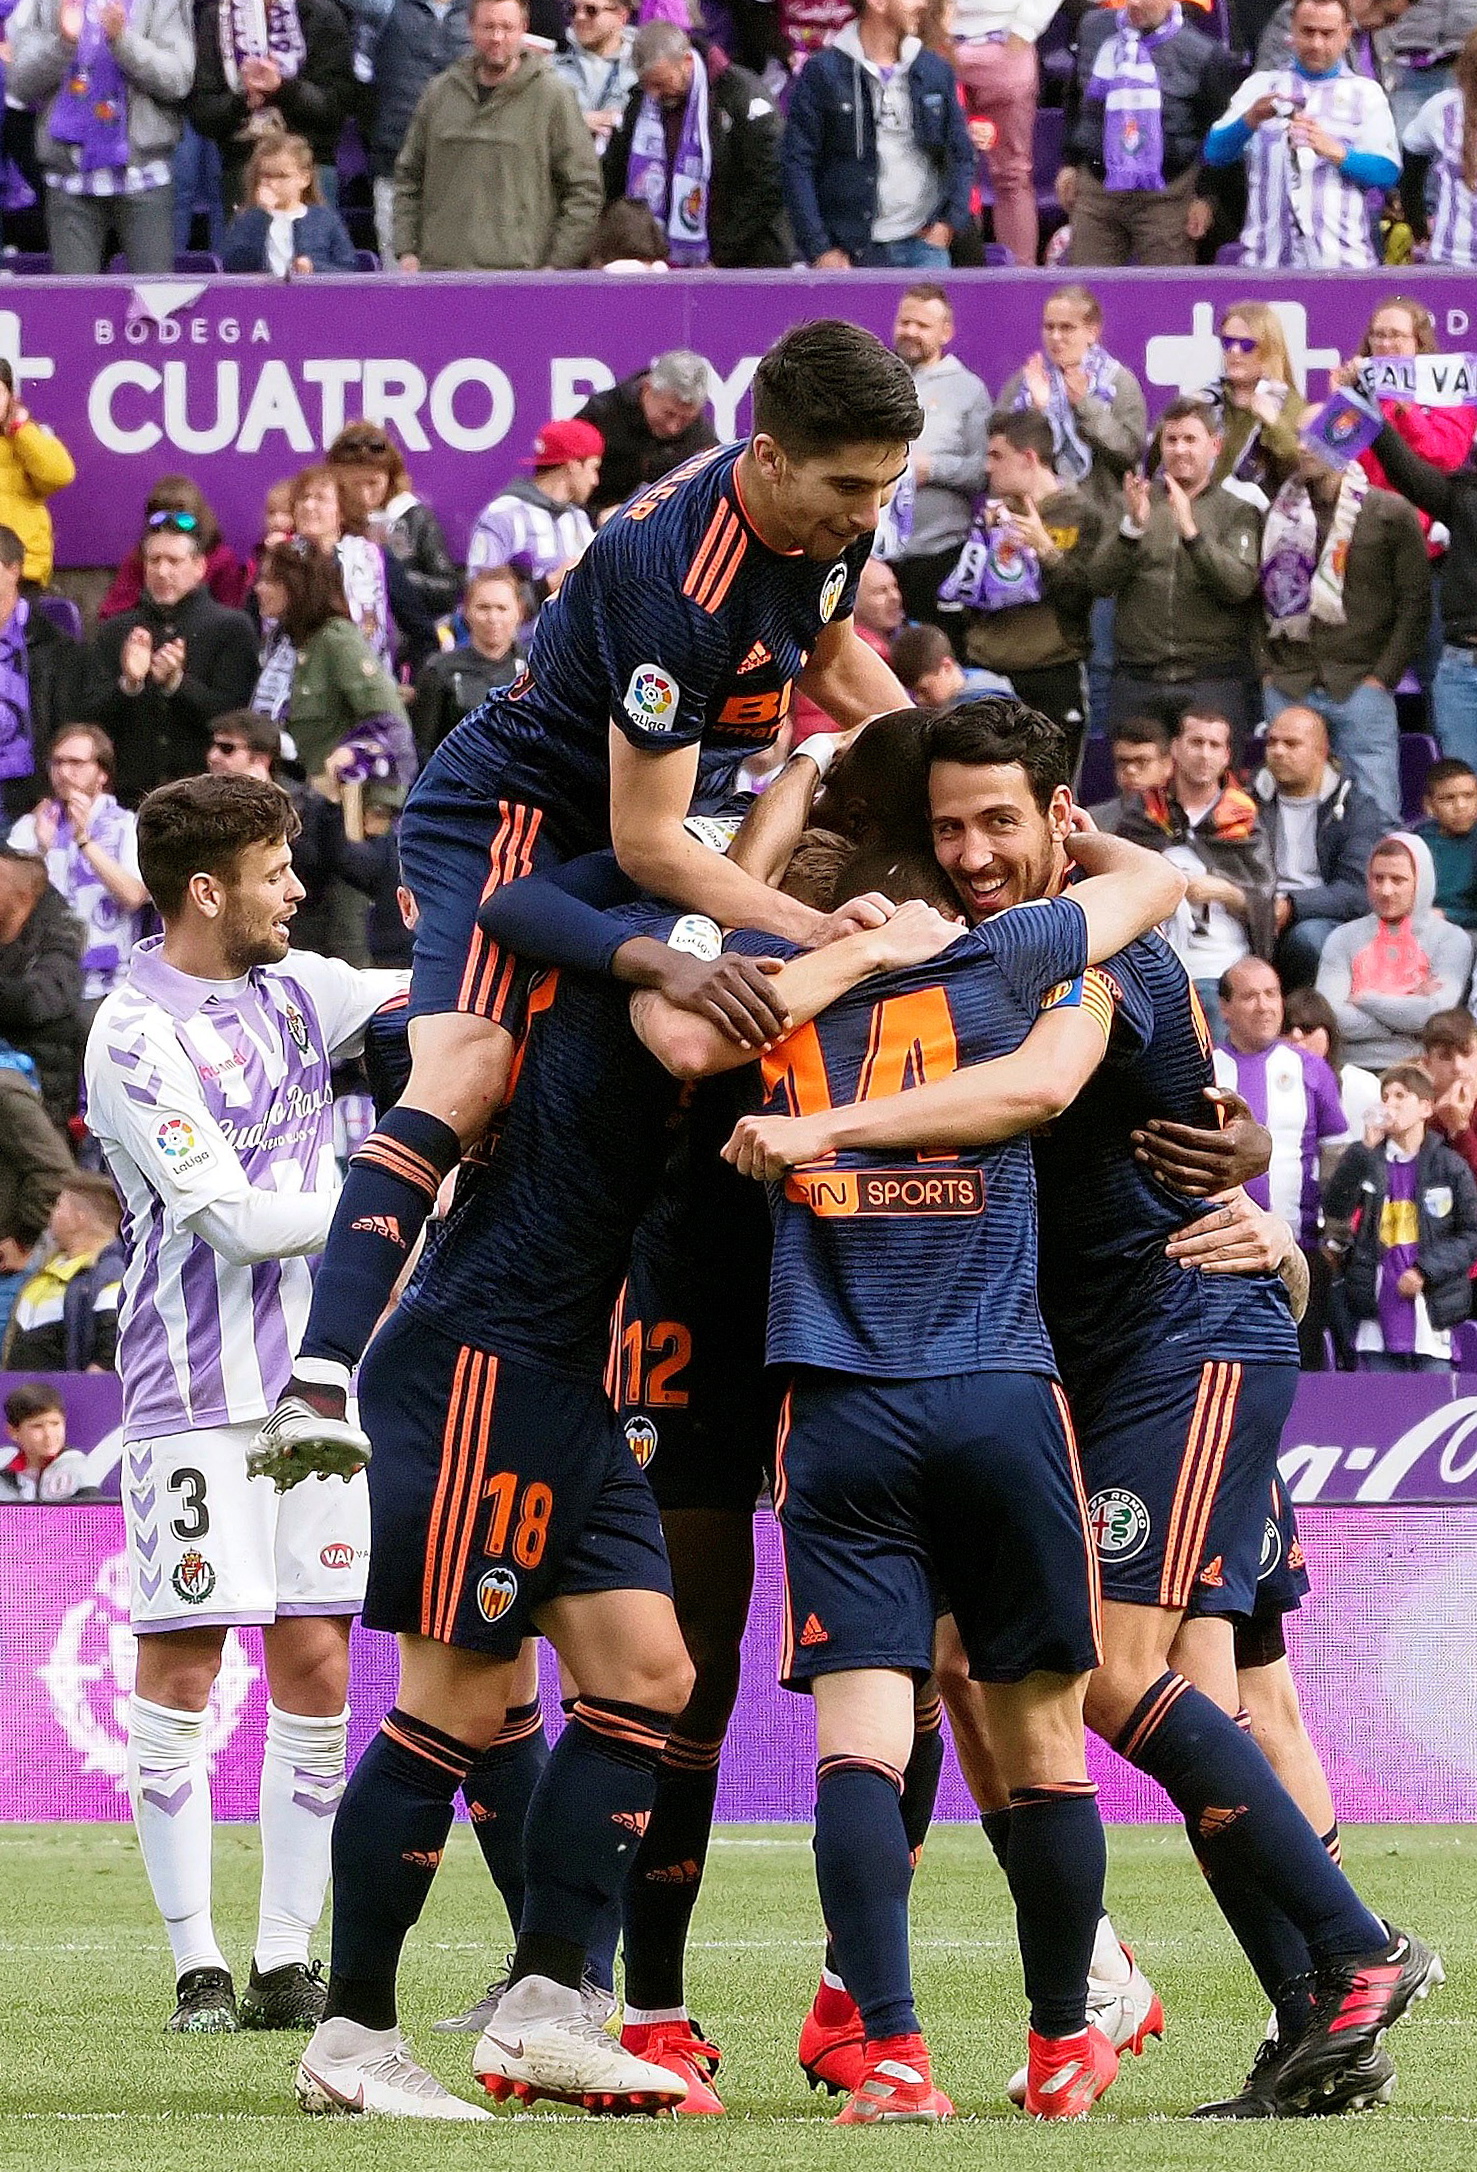 epa07582131 Valencia's players celebrate the team's classificaiton for the Champions League following a Spanish LaLiga soccer match between Valladolid and Valencia at the Jose Zorrilla stadium in Valladolid, Spain, 18 May 2019.  EPA/R. GARCIA